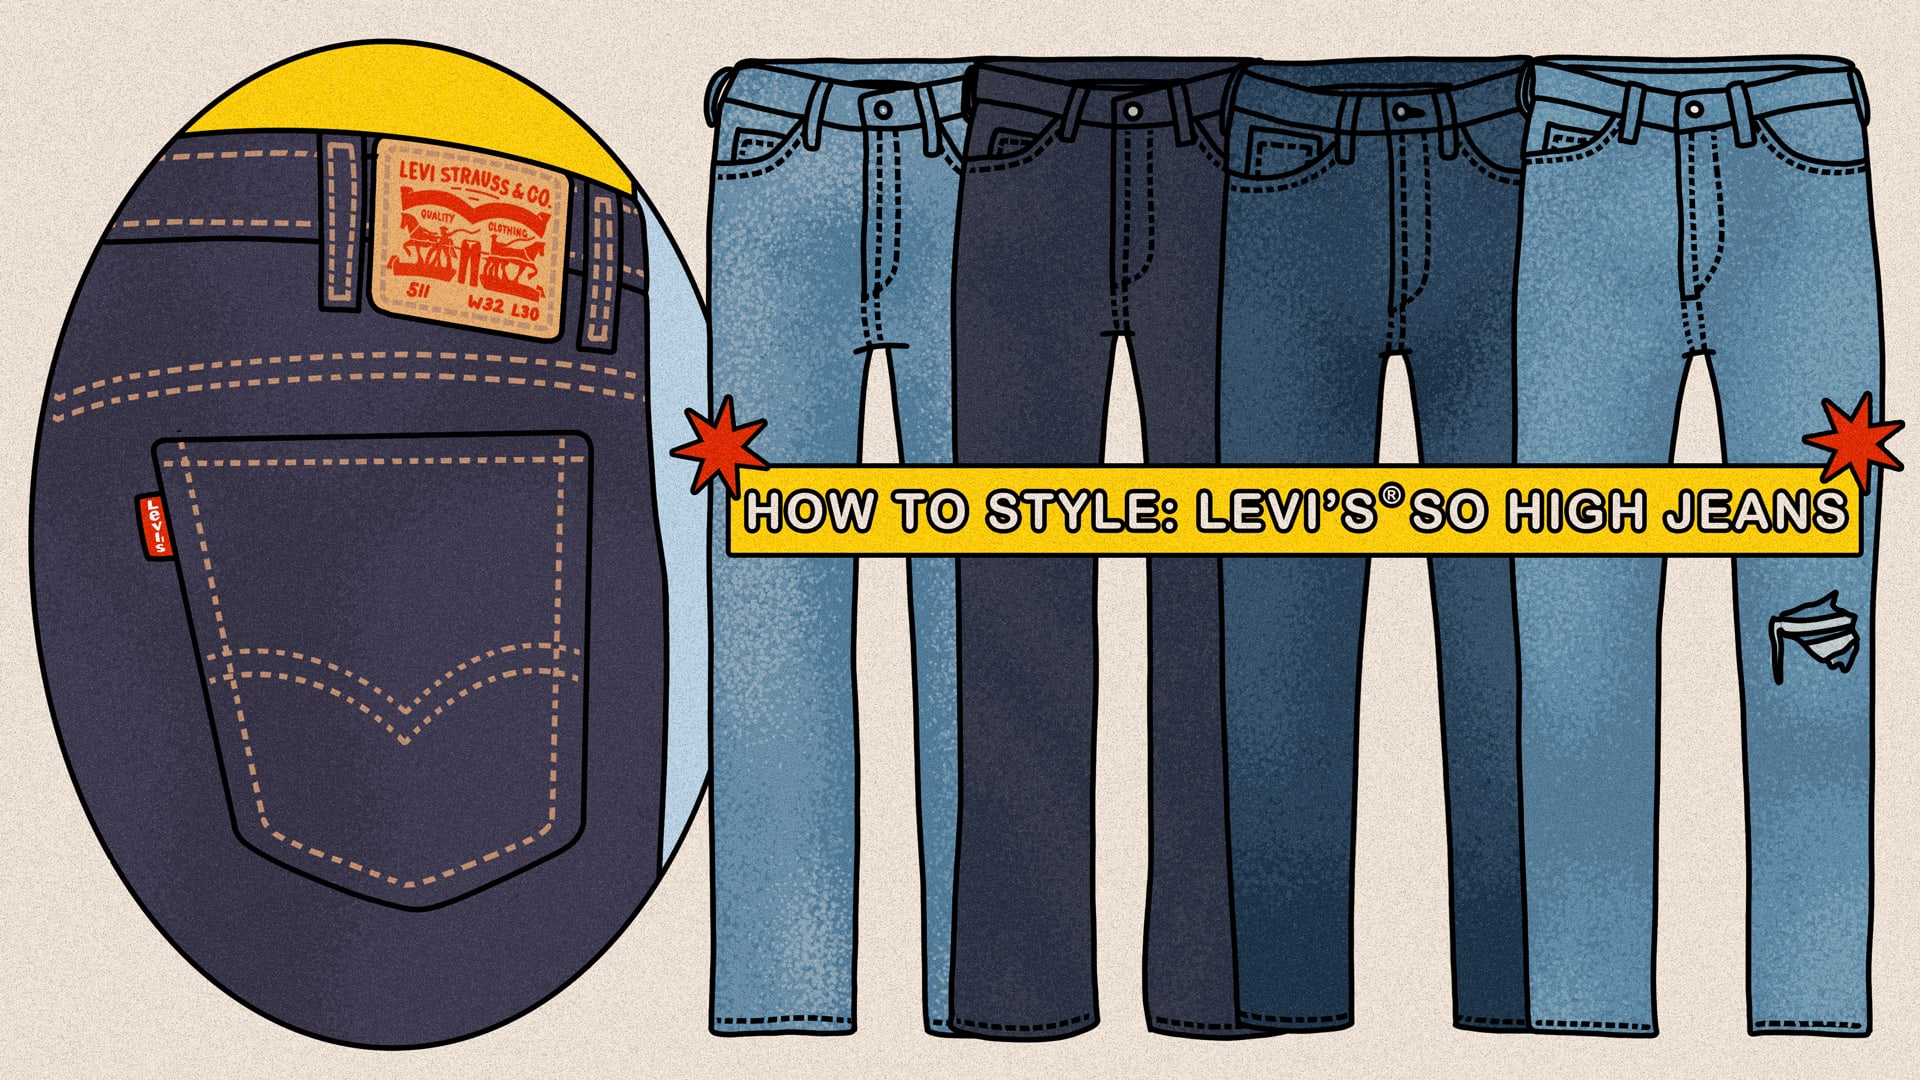 How to Wear High-Waisted Jeans: Styling Levi's® So High Pants | Complex